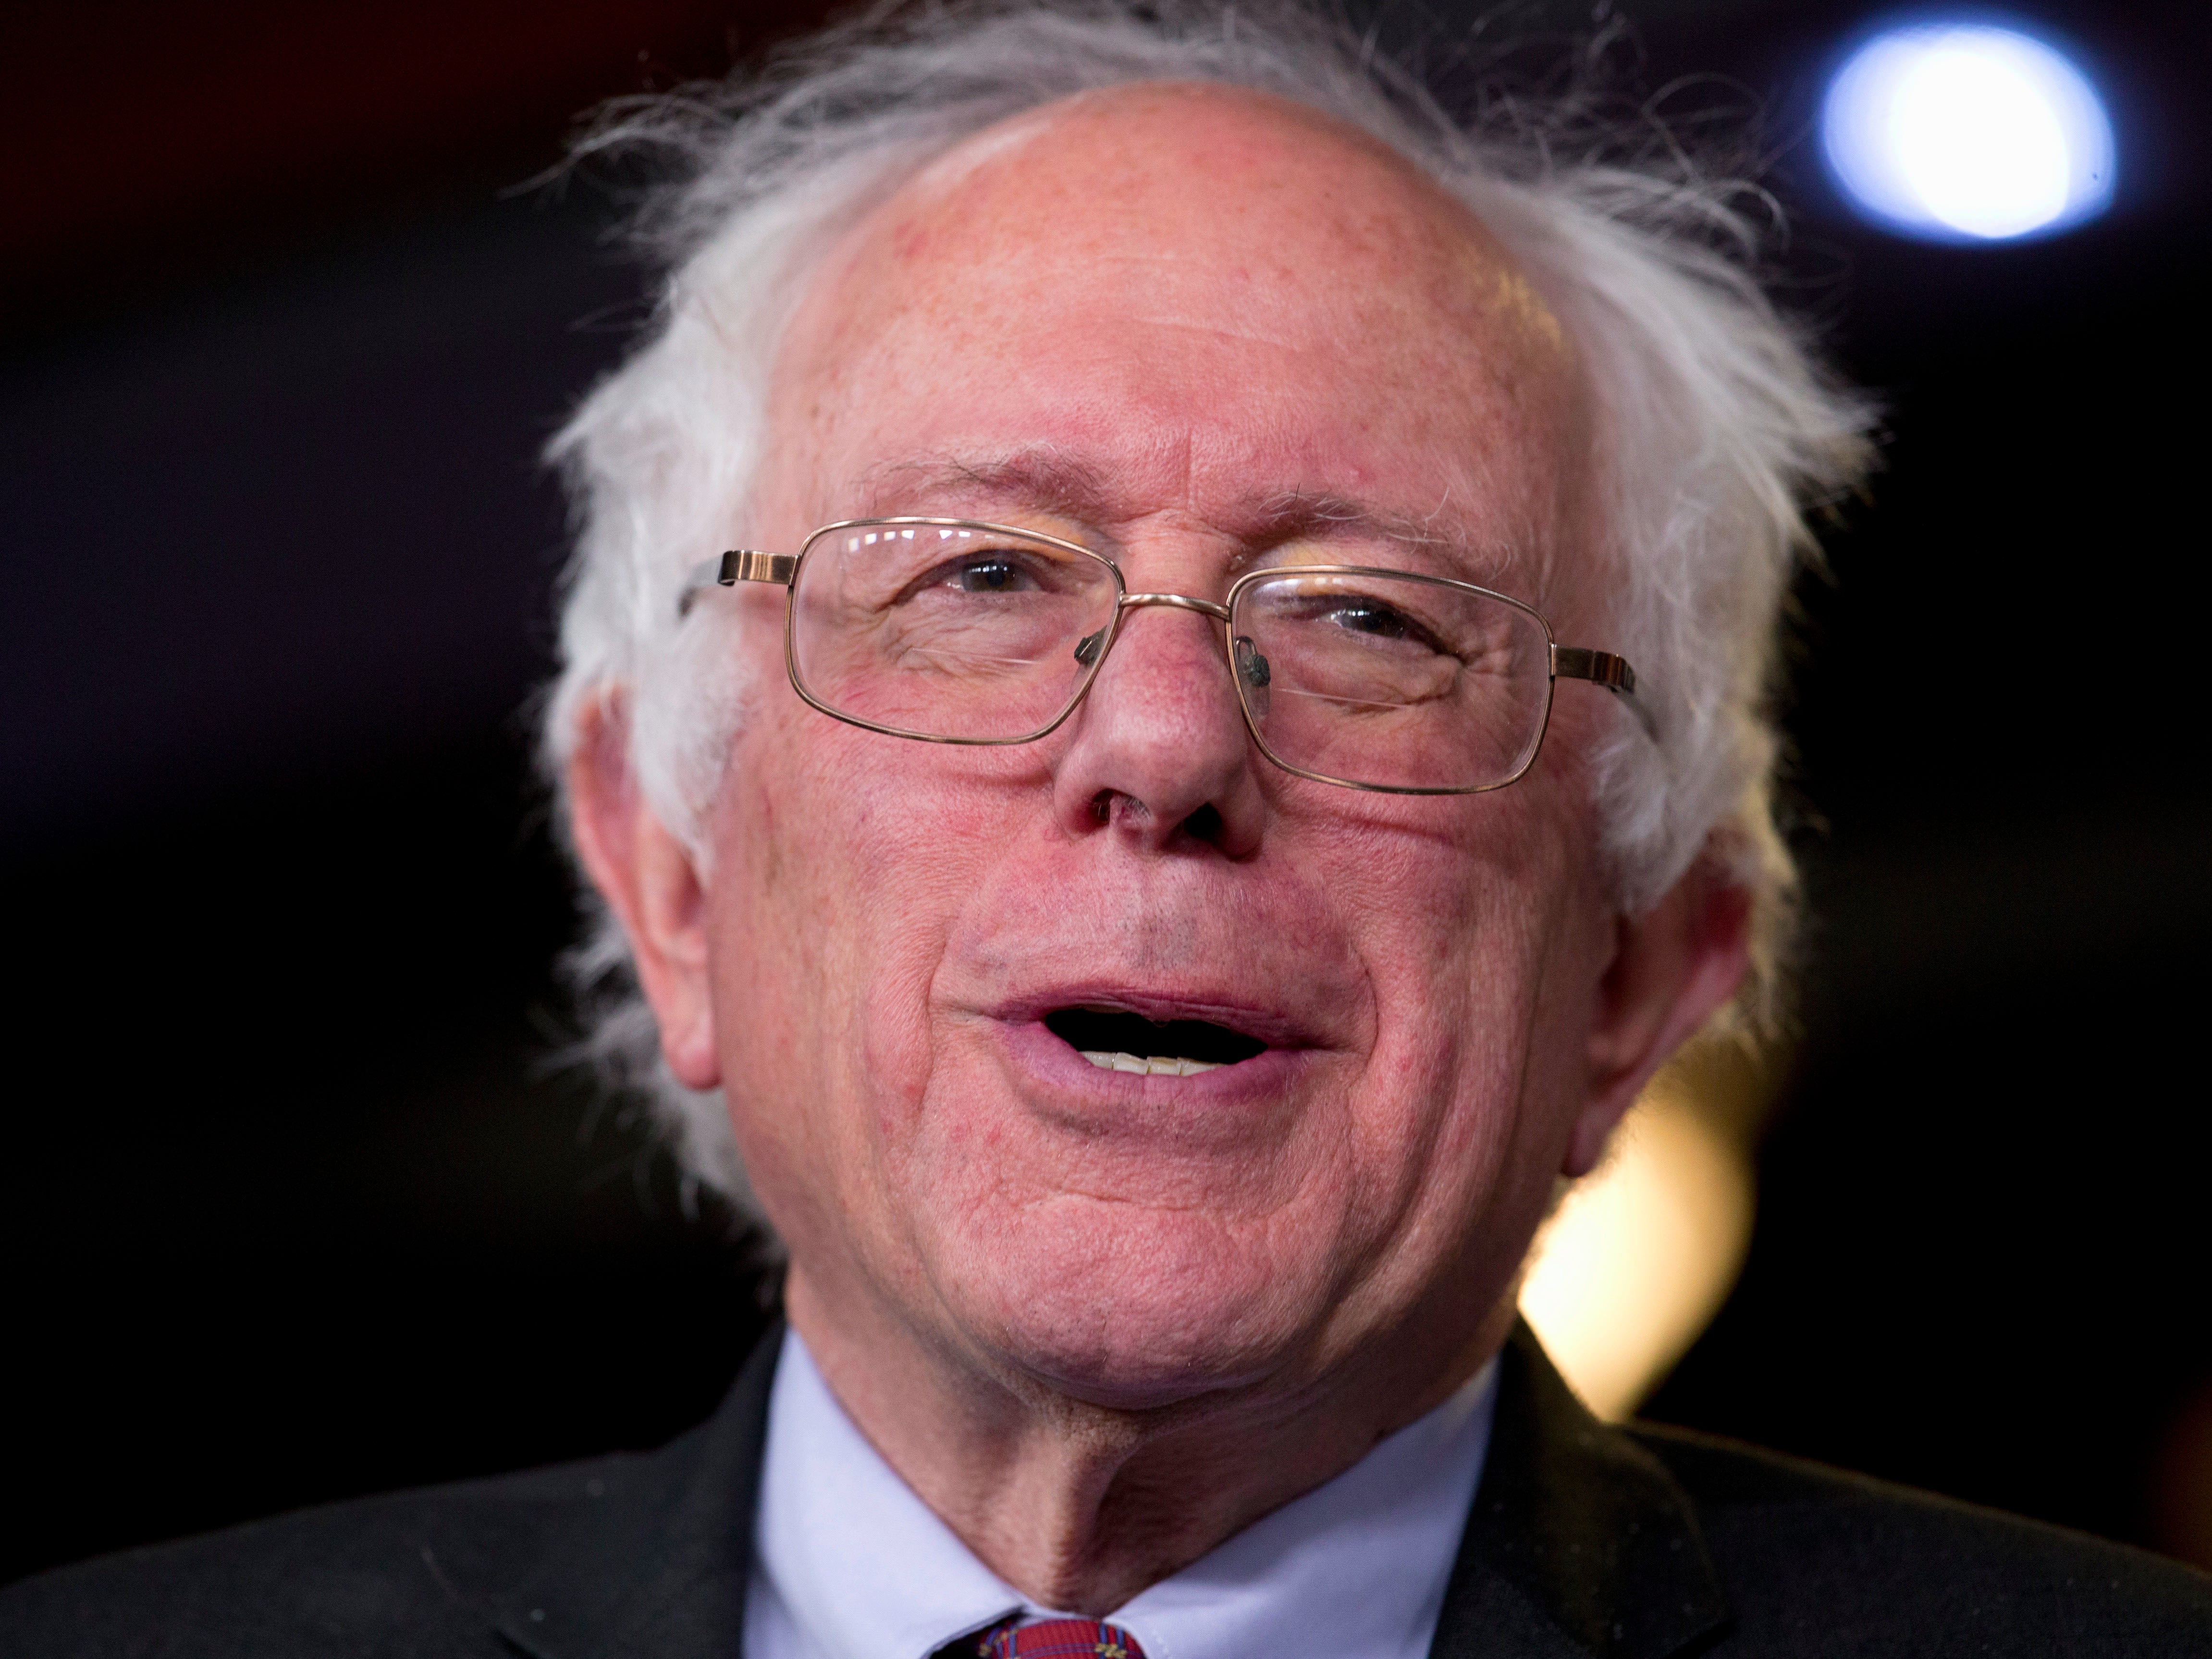 Bernie Sanders is dominating Hillary Clinton in a crucial early state